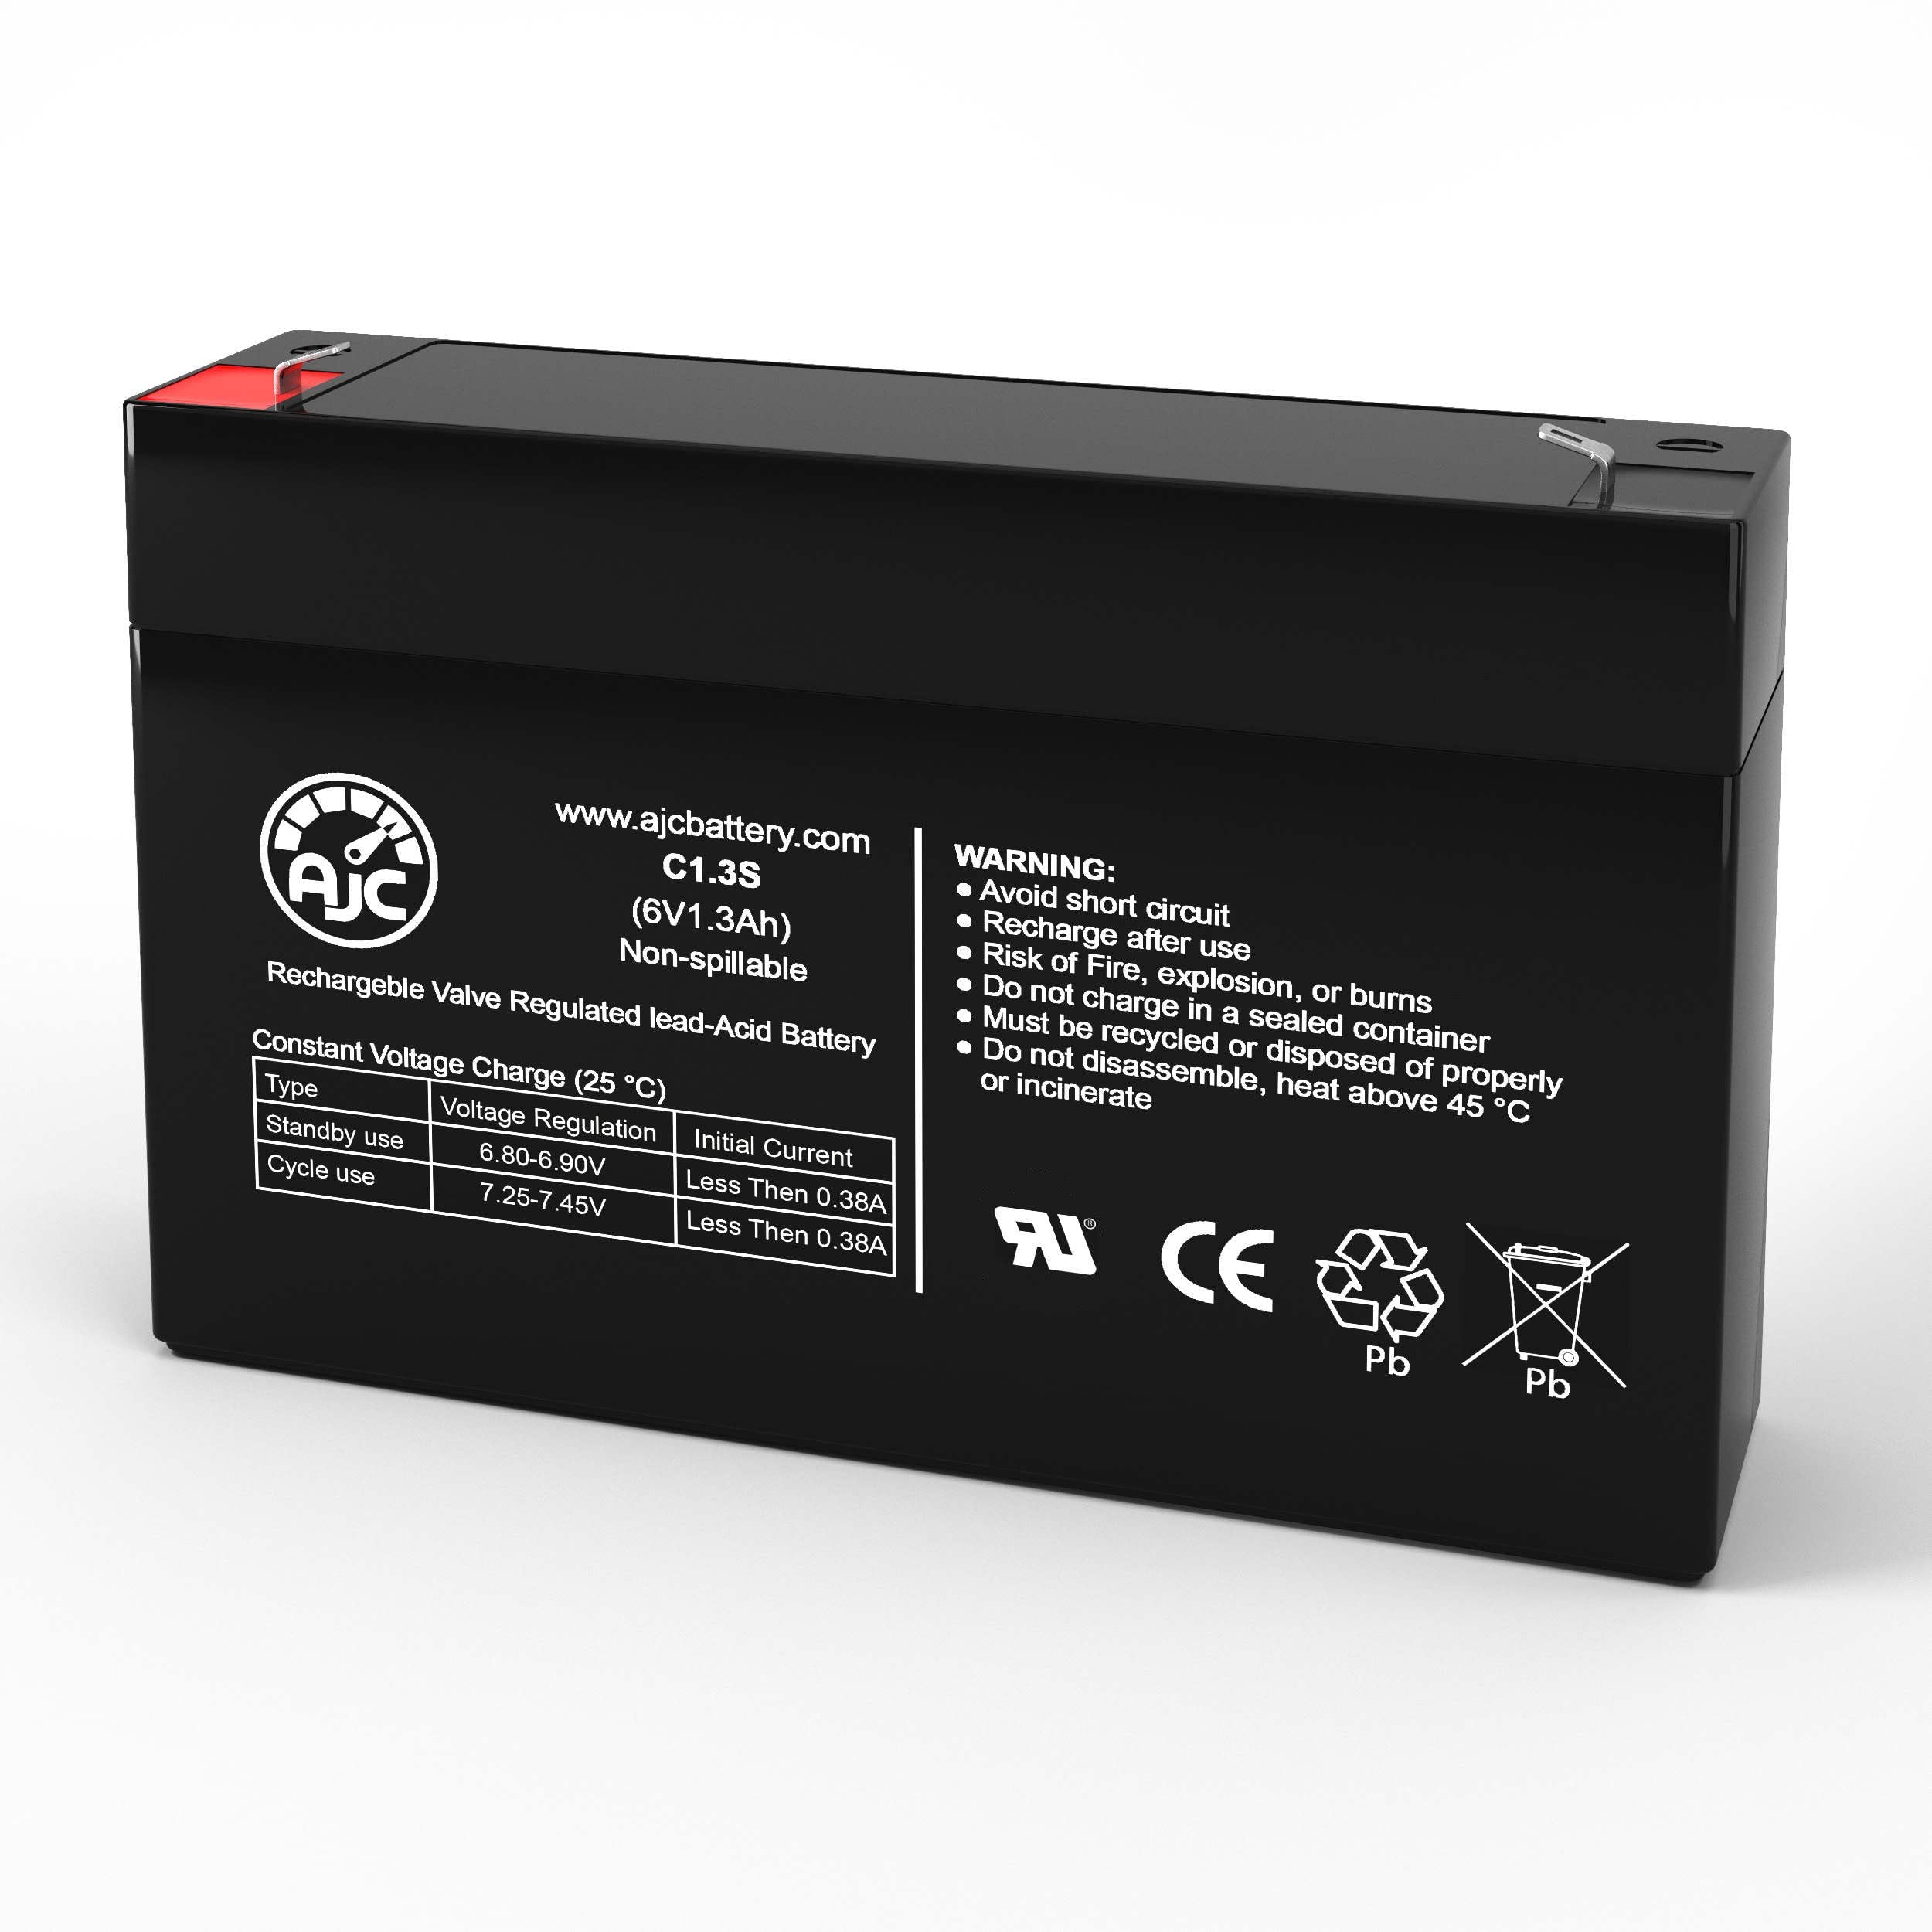 AJC Leoch DJW6-12 6V 13Ah Sealed Lead Acid Battery - This is an AJc Brand Replacement